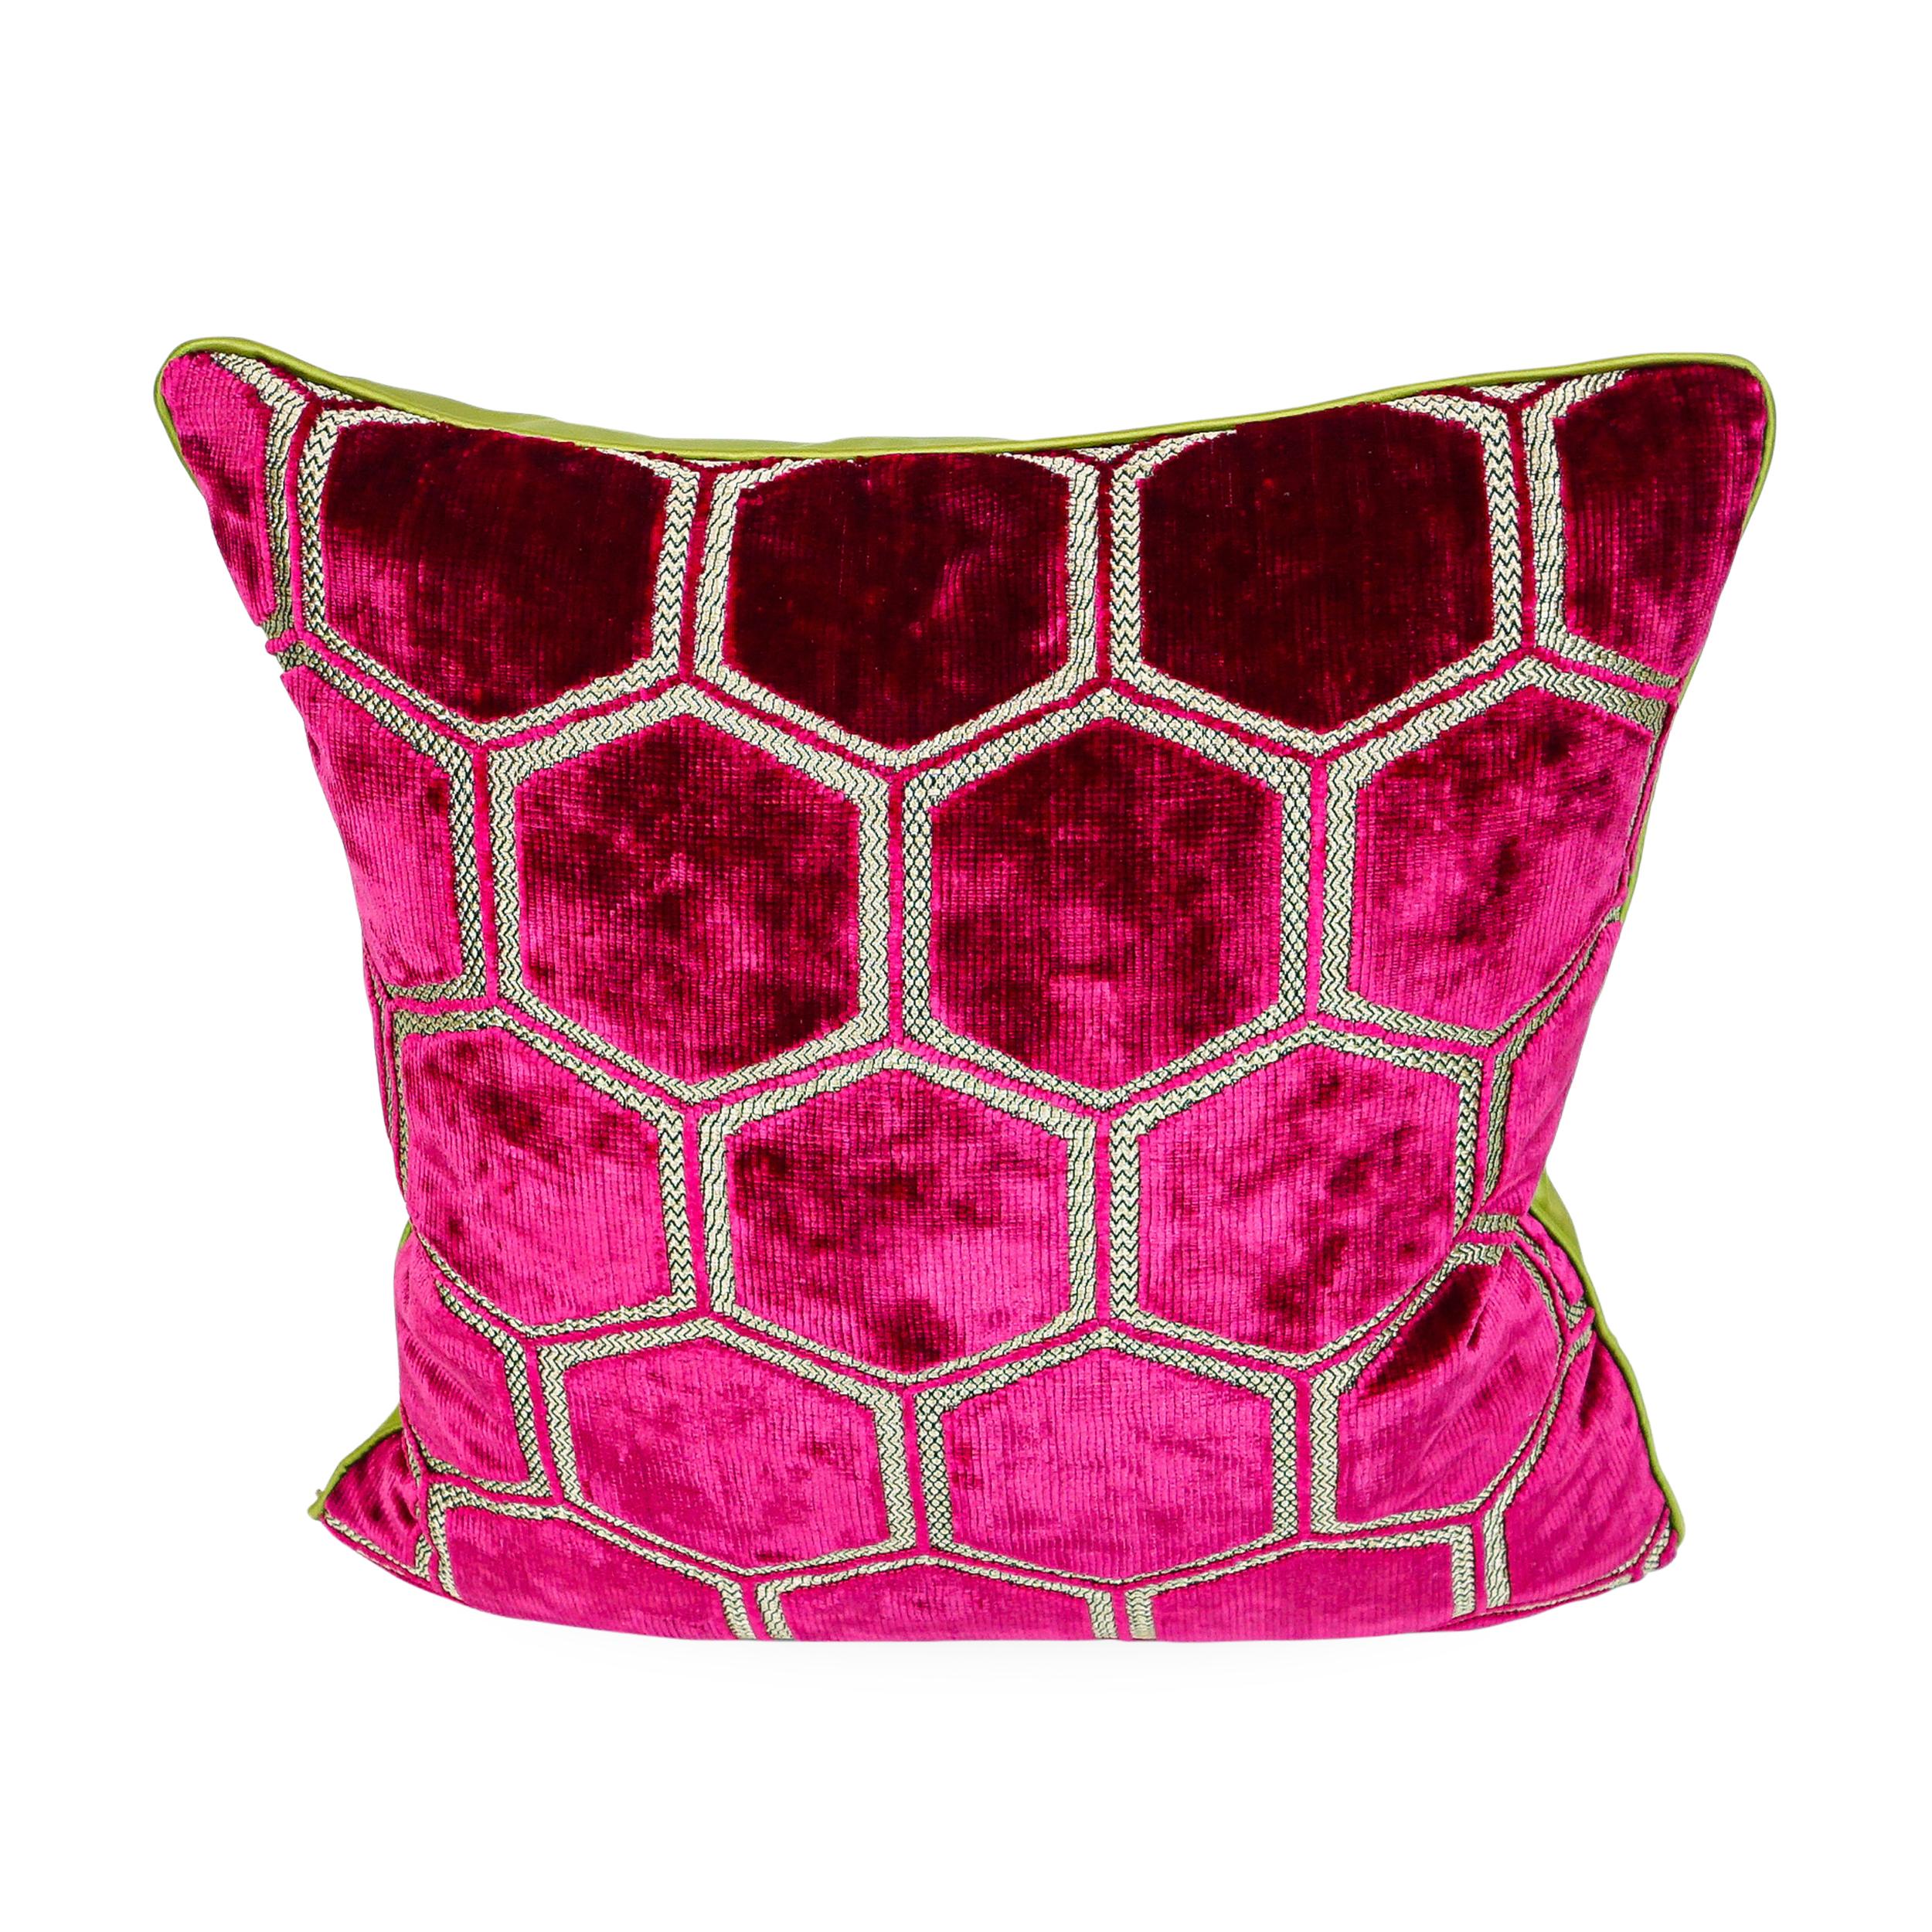 Fuchsia hexagonal cut velvet on face and chartreuse sateen on back.

Measurements:
Overall: 15” W x 5” D x 15” H

Price as shown: $830 as a pair
COM Price: $350 as a pair
Customization may change price.

How we work:
Made to order by